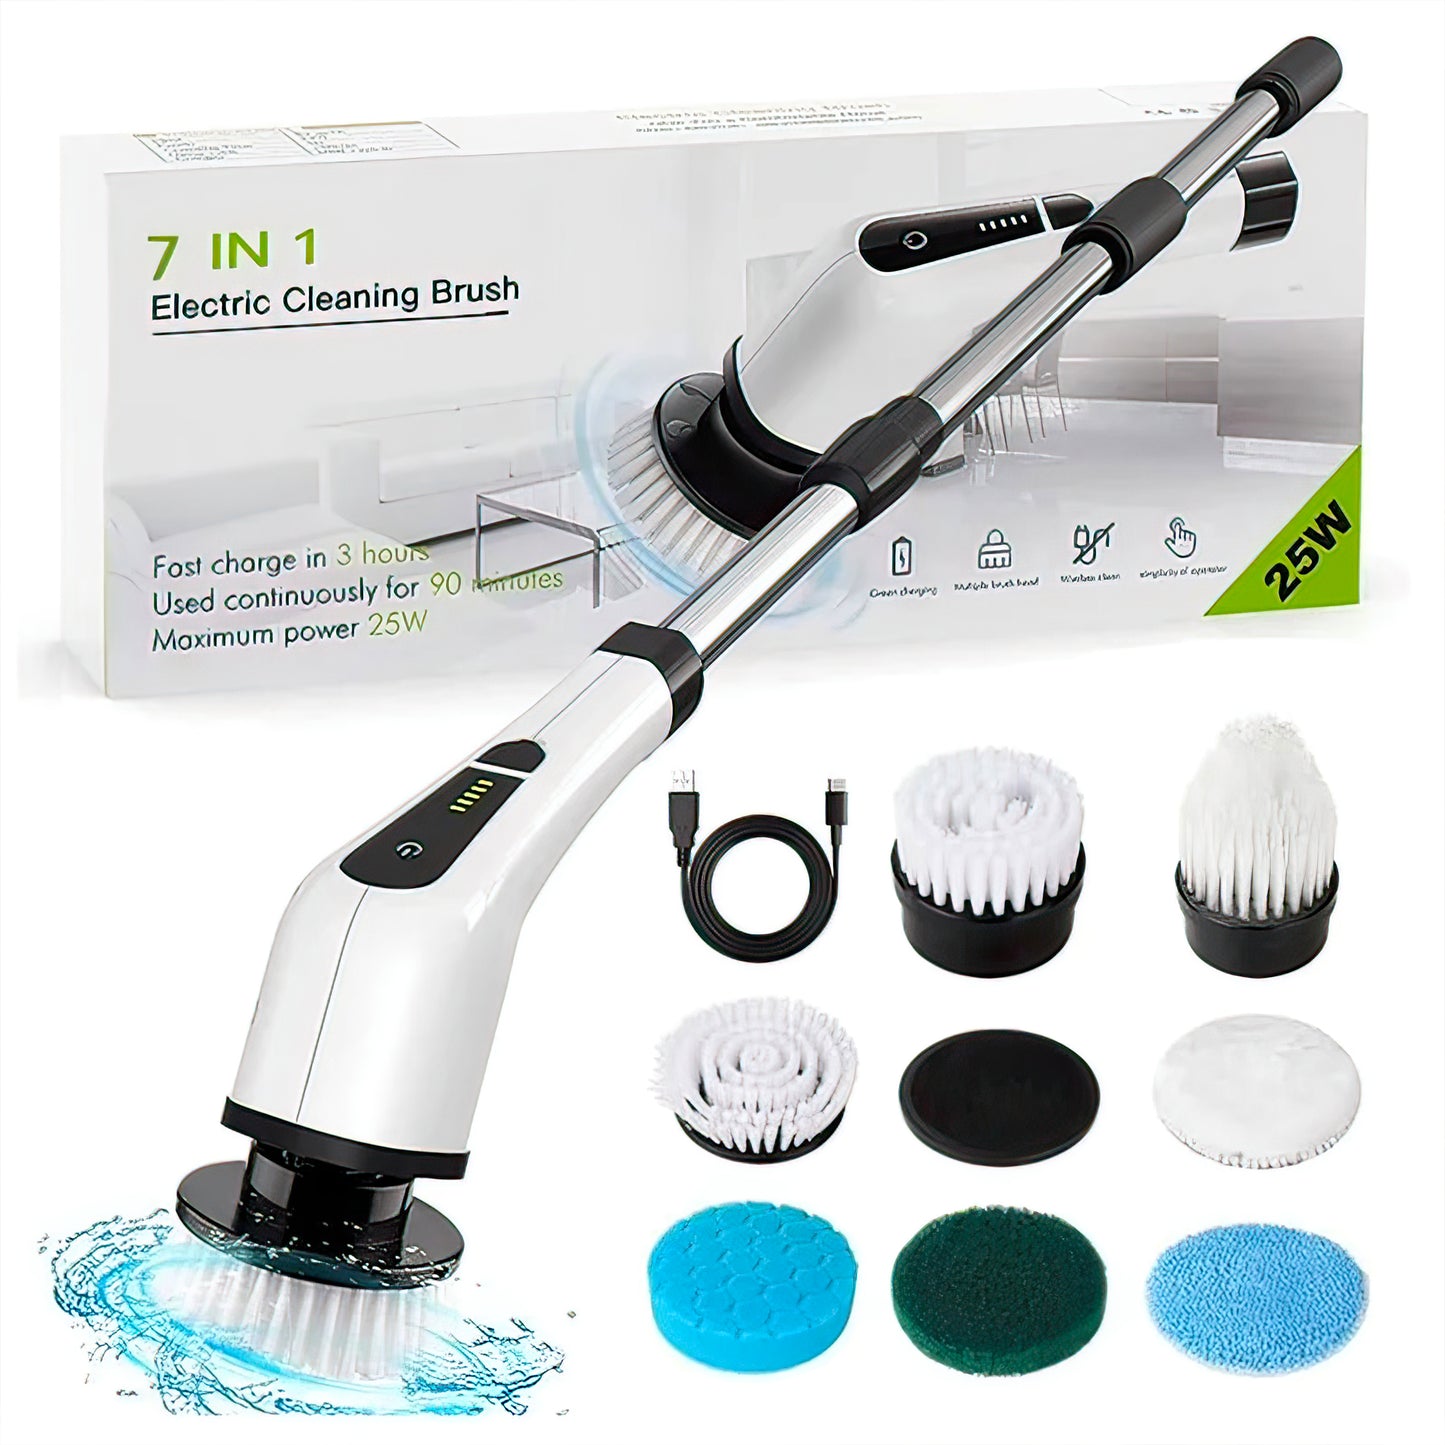 8 in 1 Smart Electric Cleaning Brush Powerfull Motor